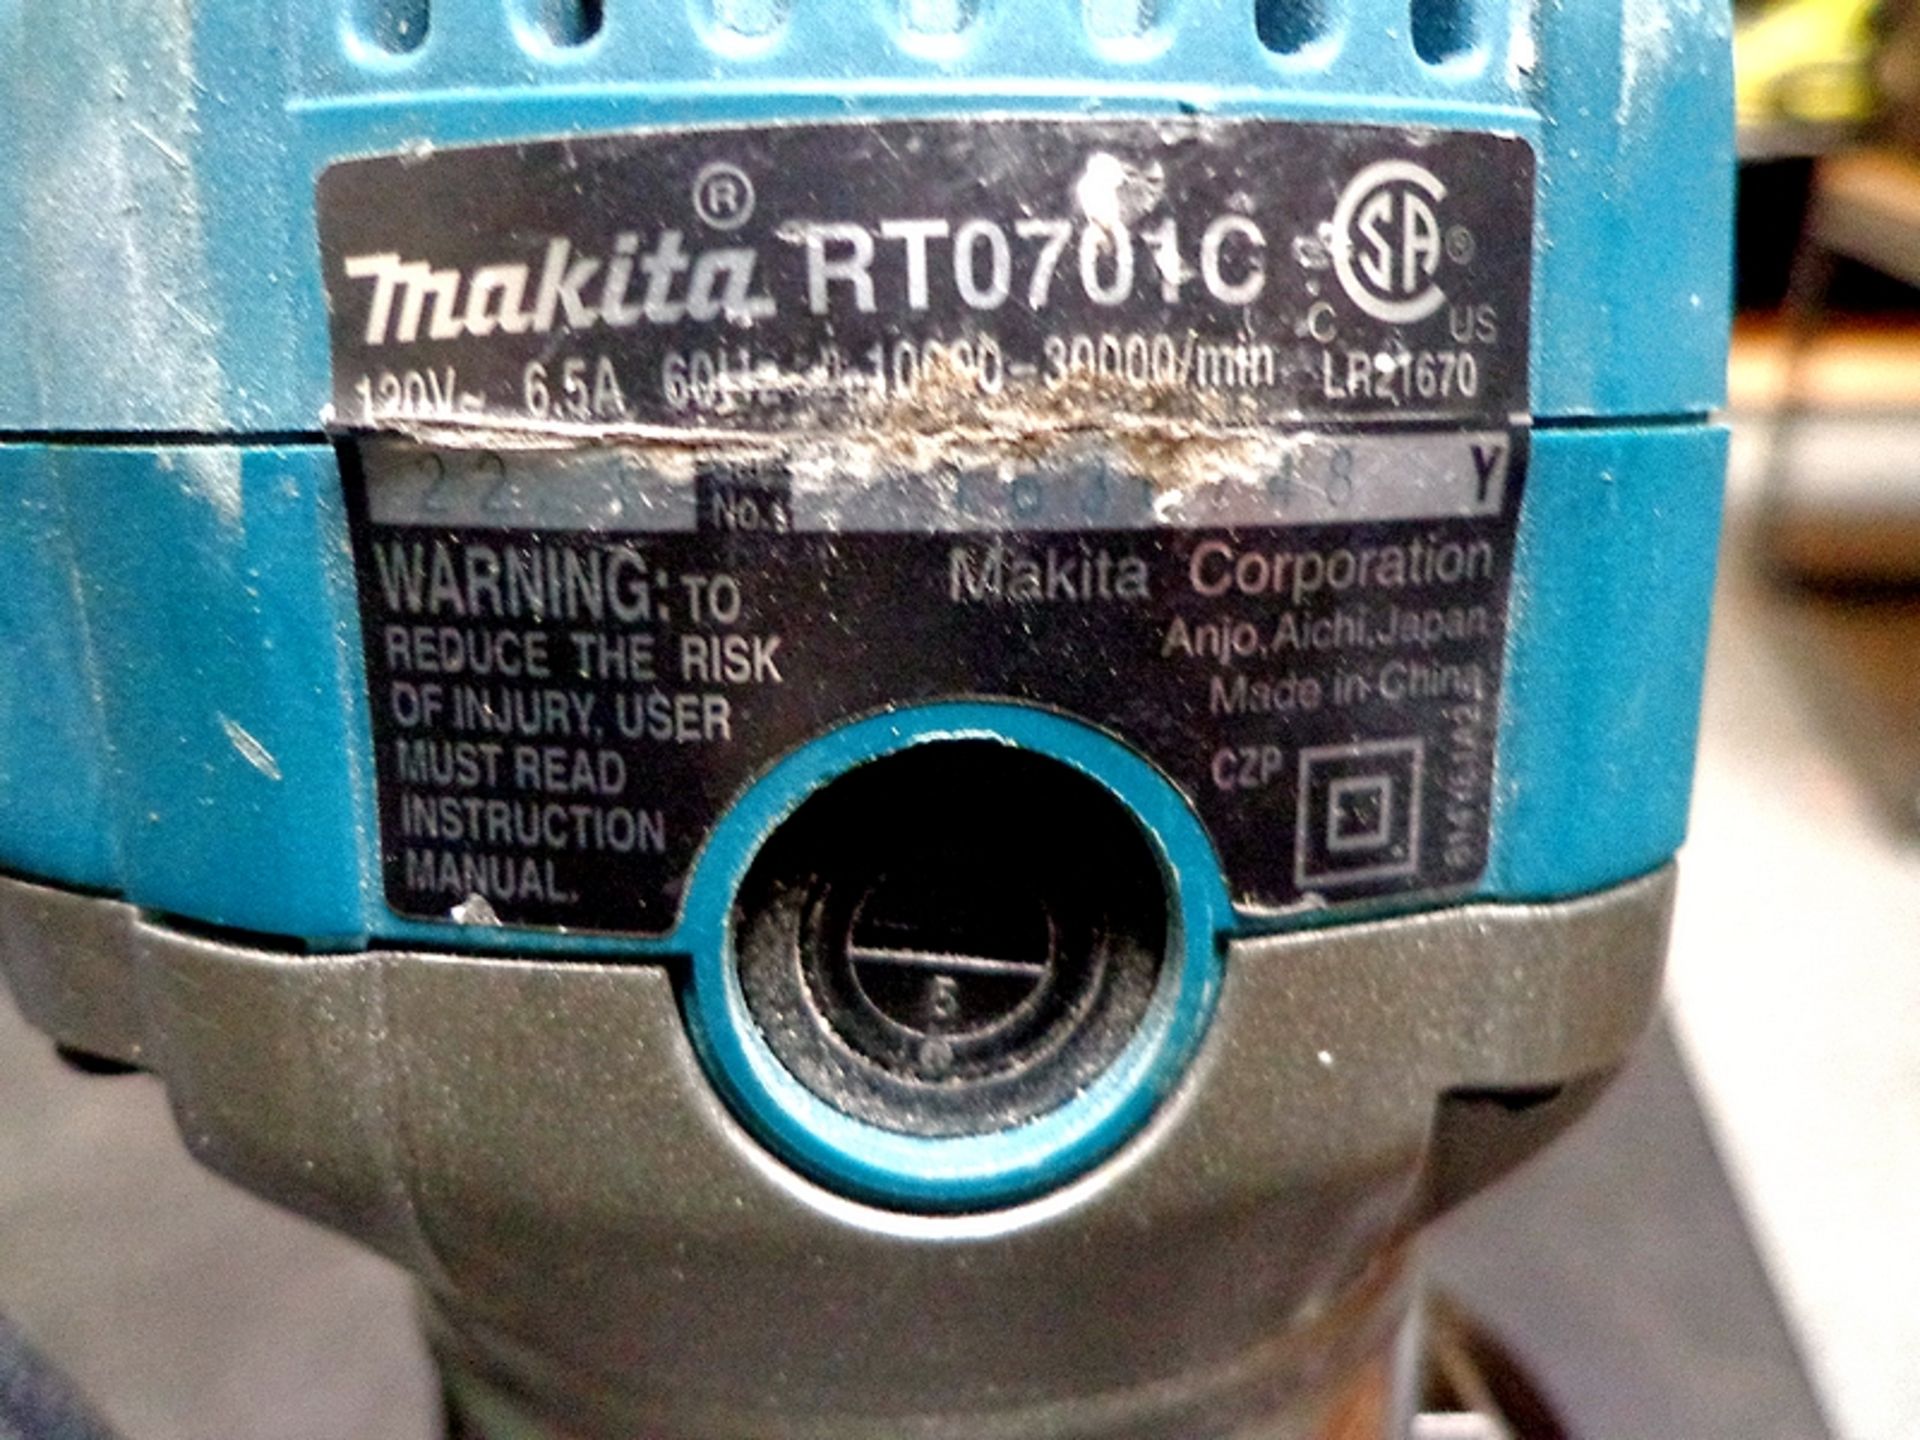 LOT (2) MAKITA RT0701C 1-1 1/4" HP COMPACT ROUTER - Image 4 of 4